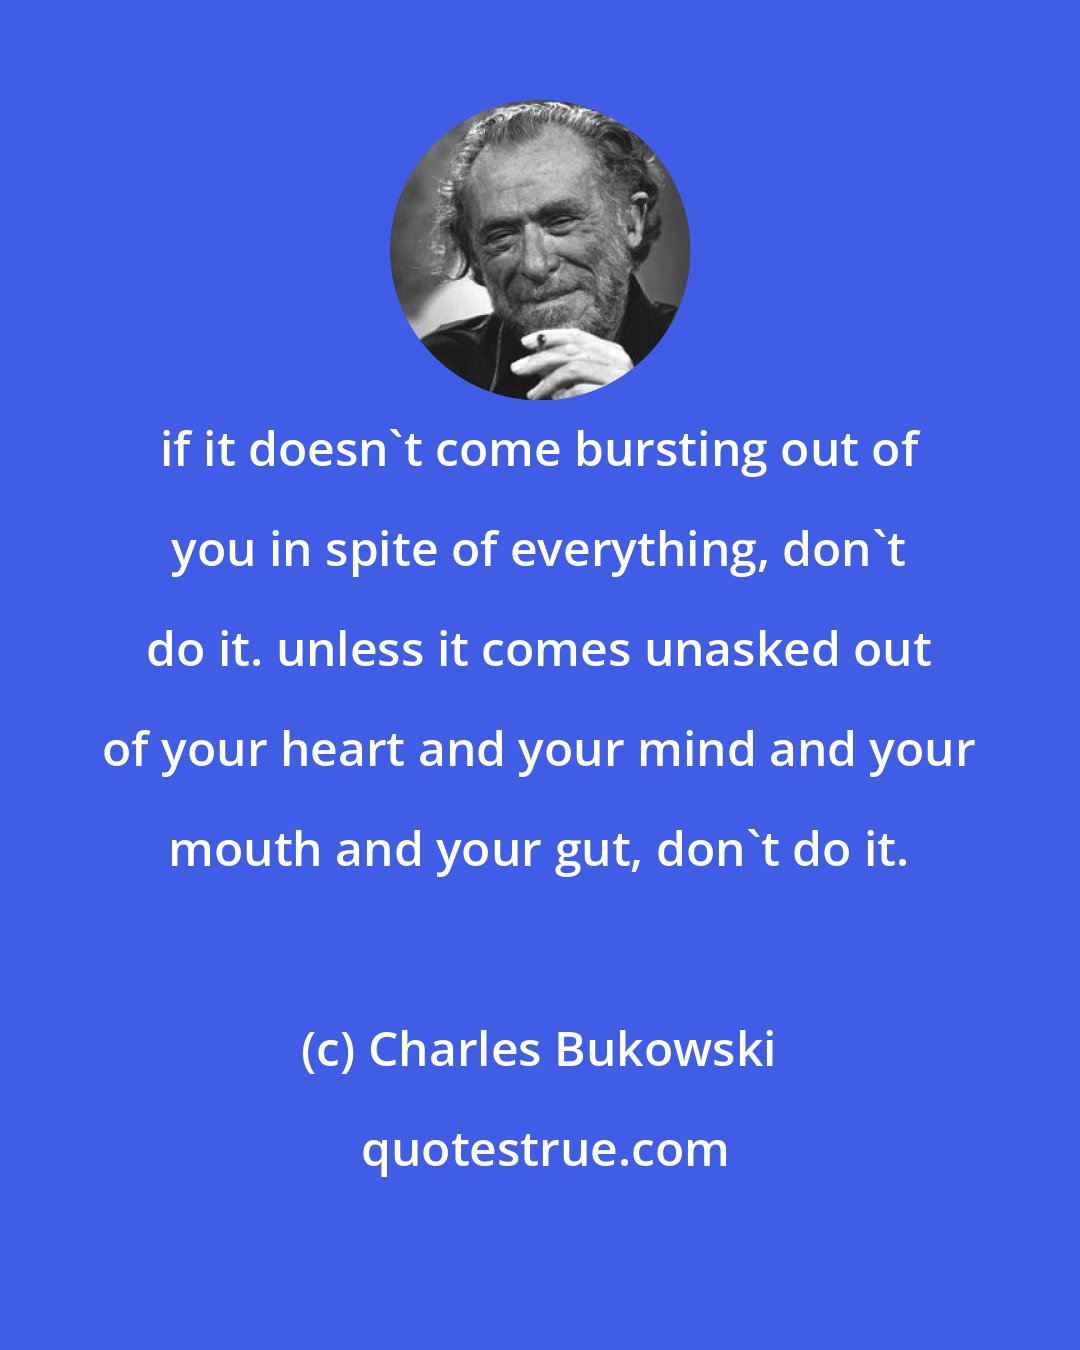 Charles Bukowski: if it doesn't come bursting out of you in spite of everything, don't do it. unless it comes unasked out of your heart and your mind and your mouth and your gut, don't do it.